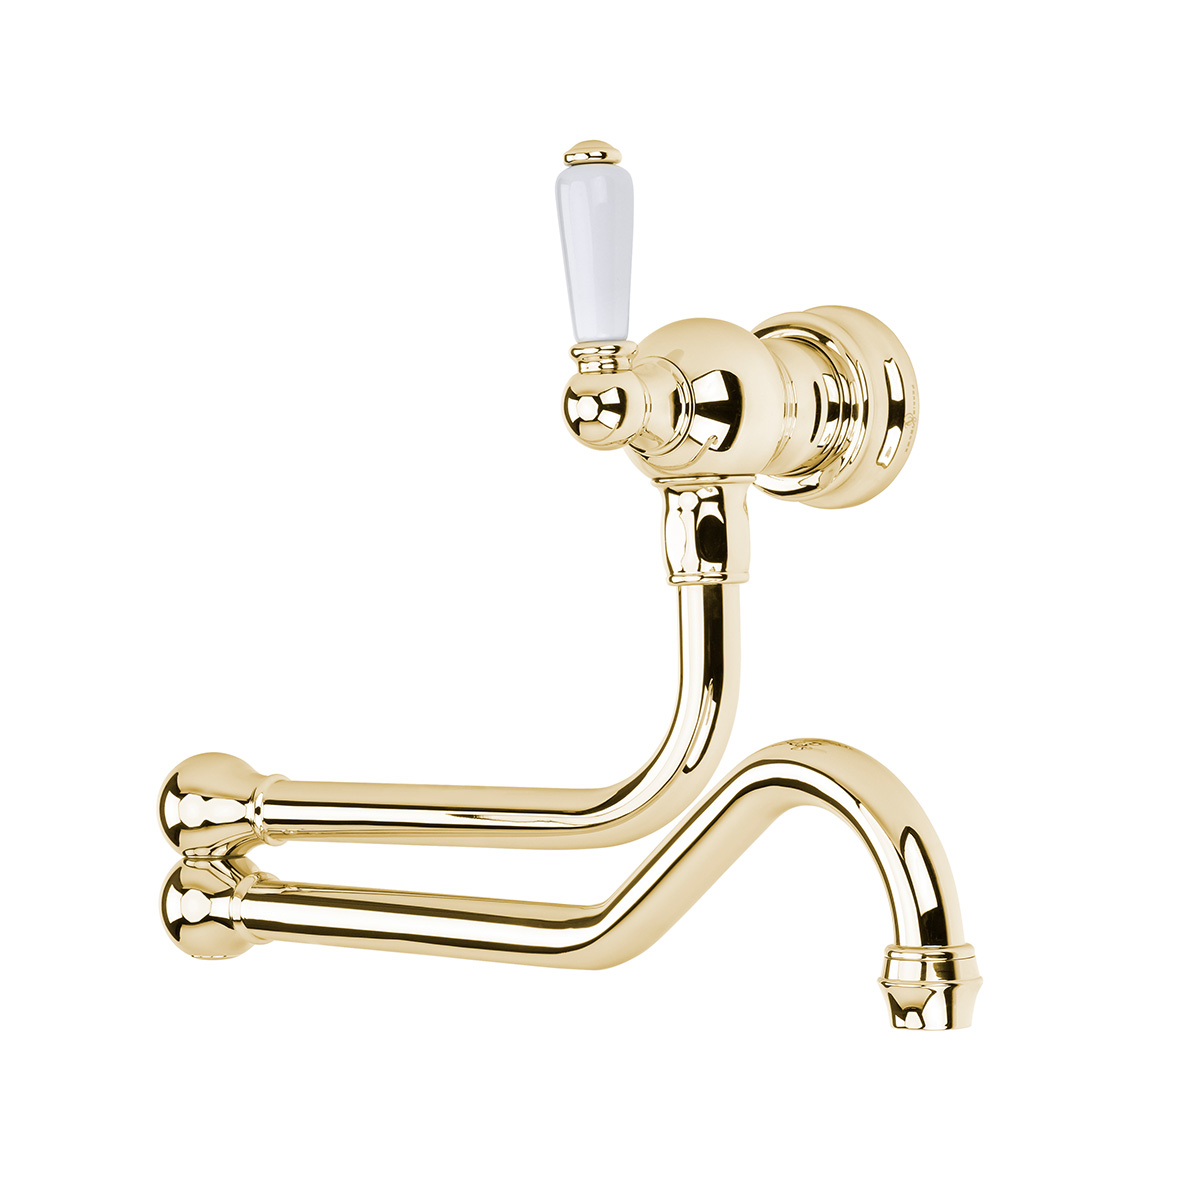 Shaws by Perrin & Rowe wall mounted pot filler in Gold. Traditional style pot filler with single white porcelain handle - AUSH.4417. Distributed in Australia by Luxe by Design, Brisbane.